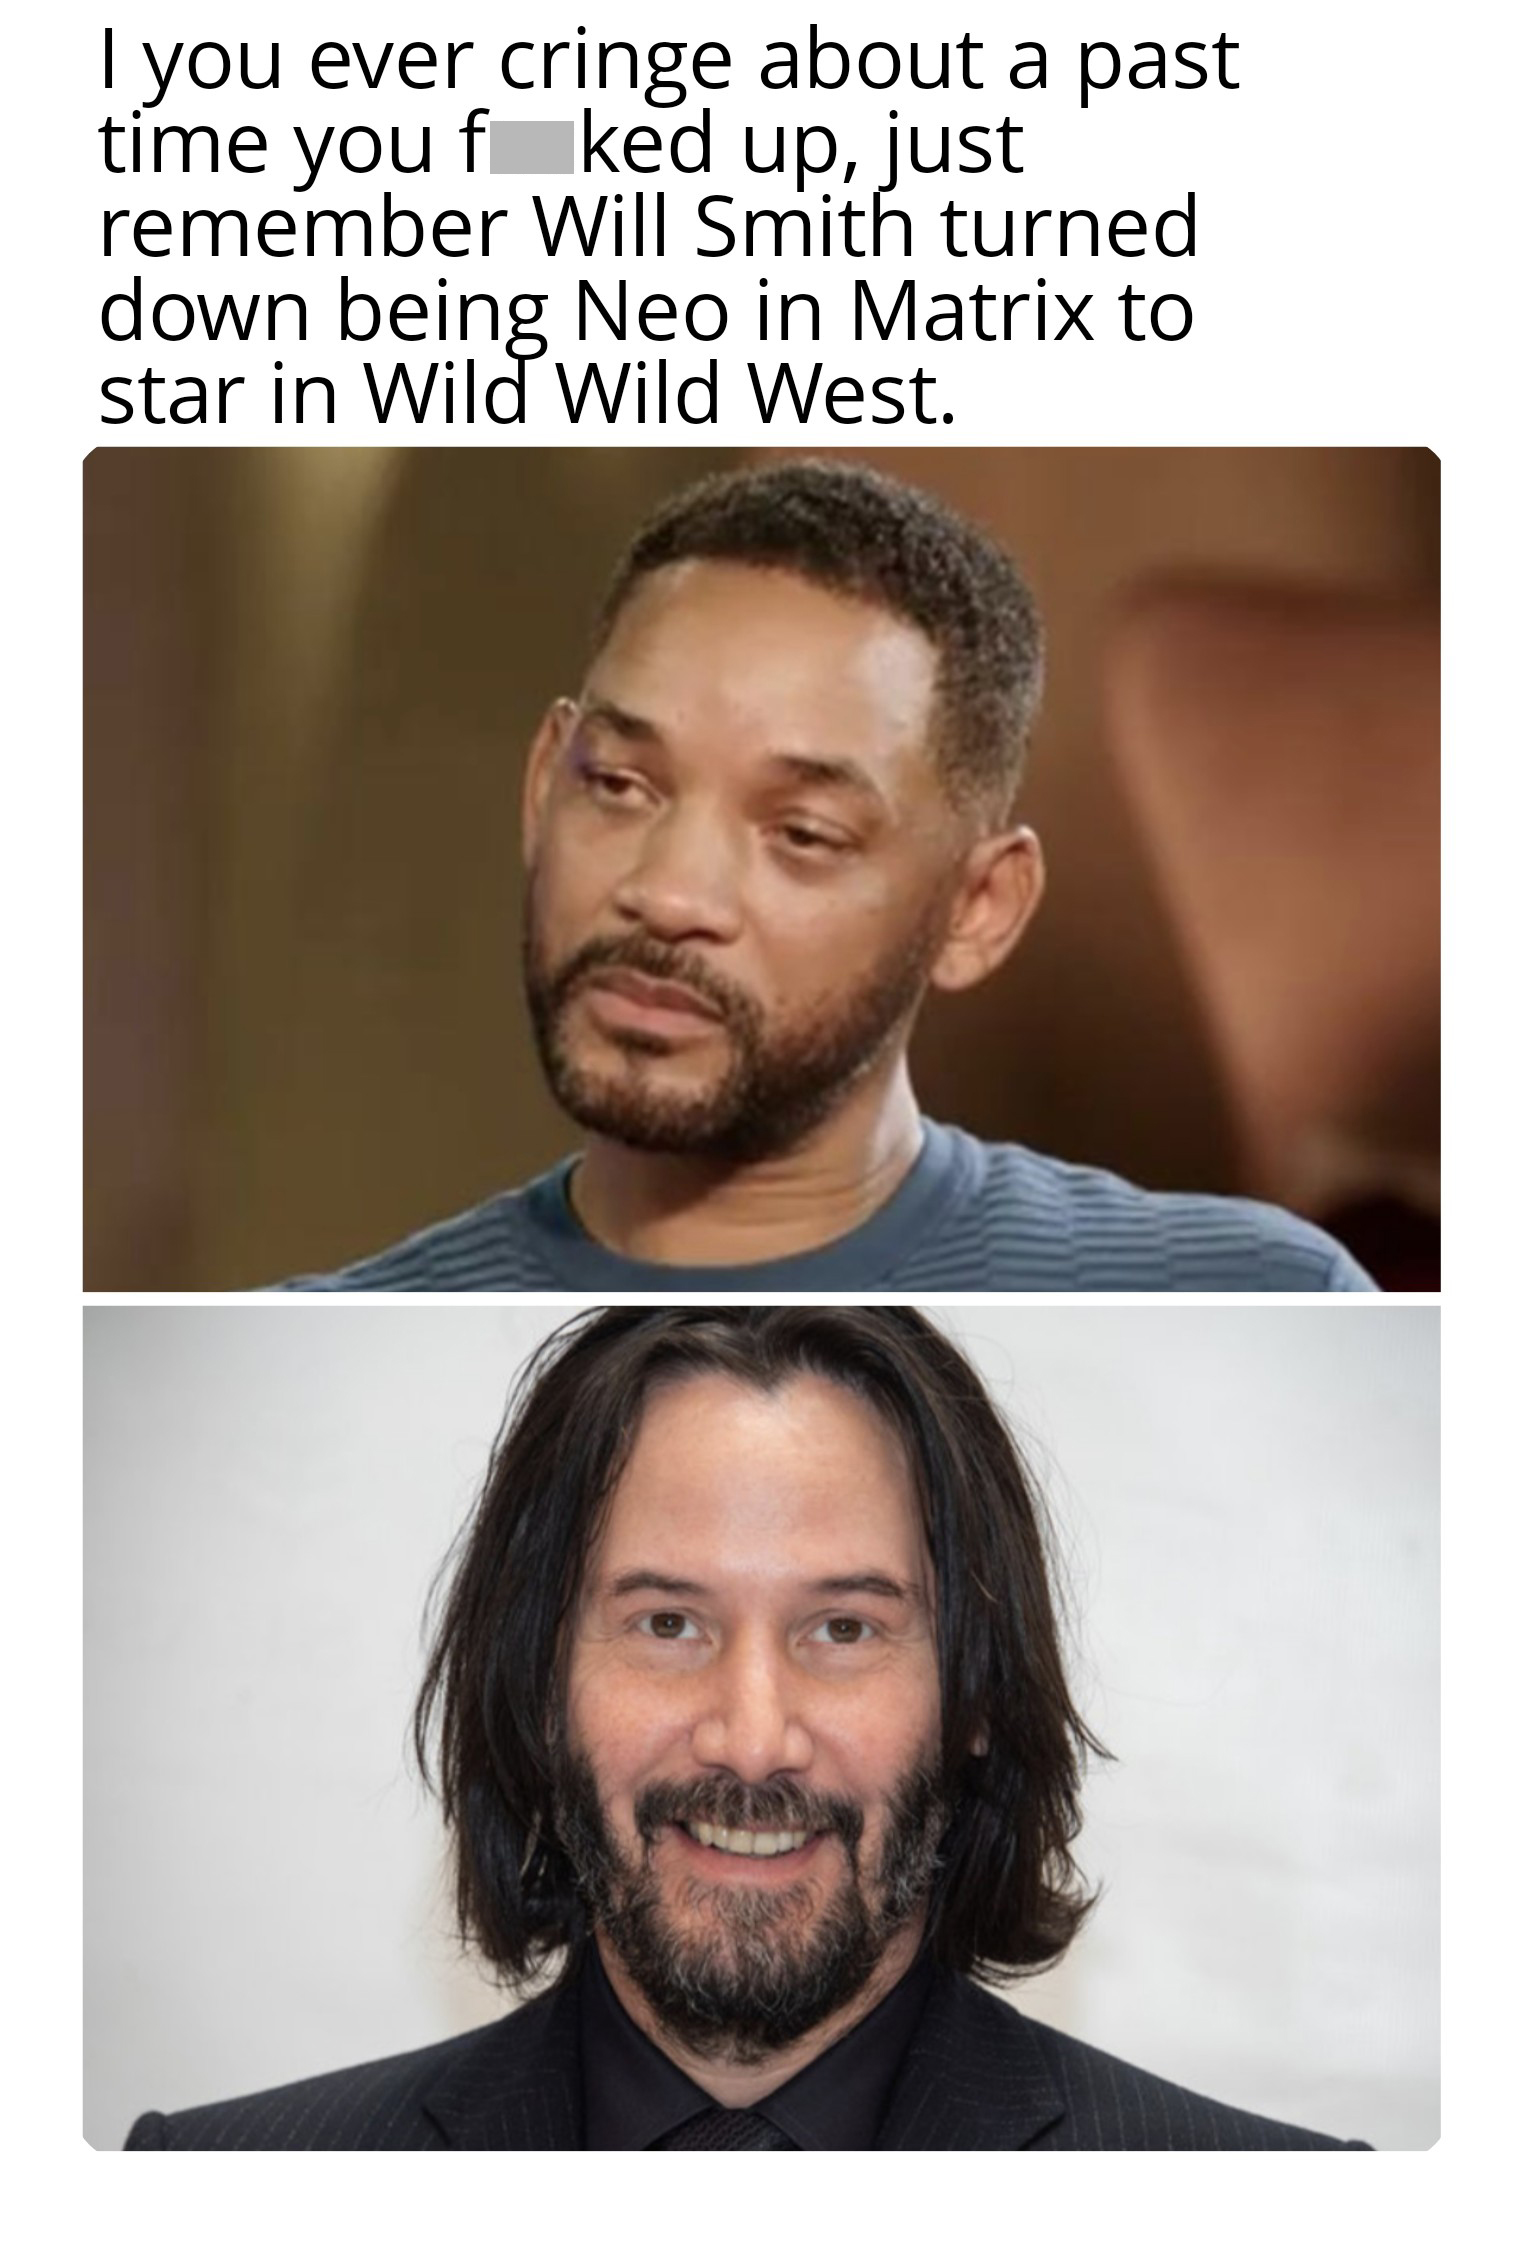 dank memes and pics - beard - I you ever cringe about a past time you f ked up, just remember Will Smith turned down being Neo in Matrix to star in Wild Wild West.